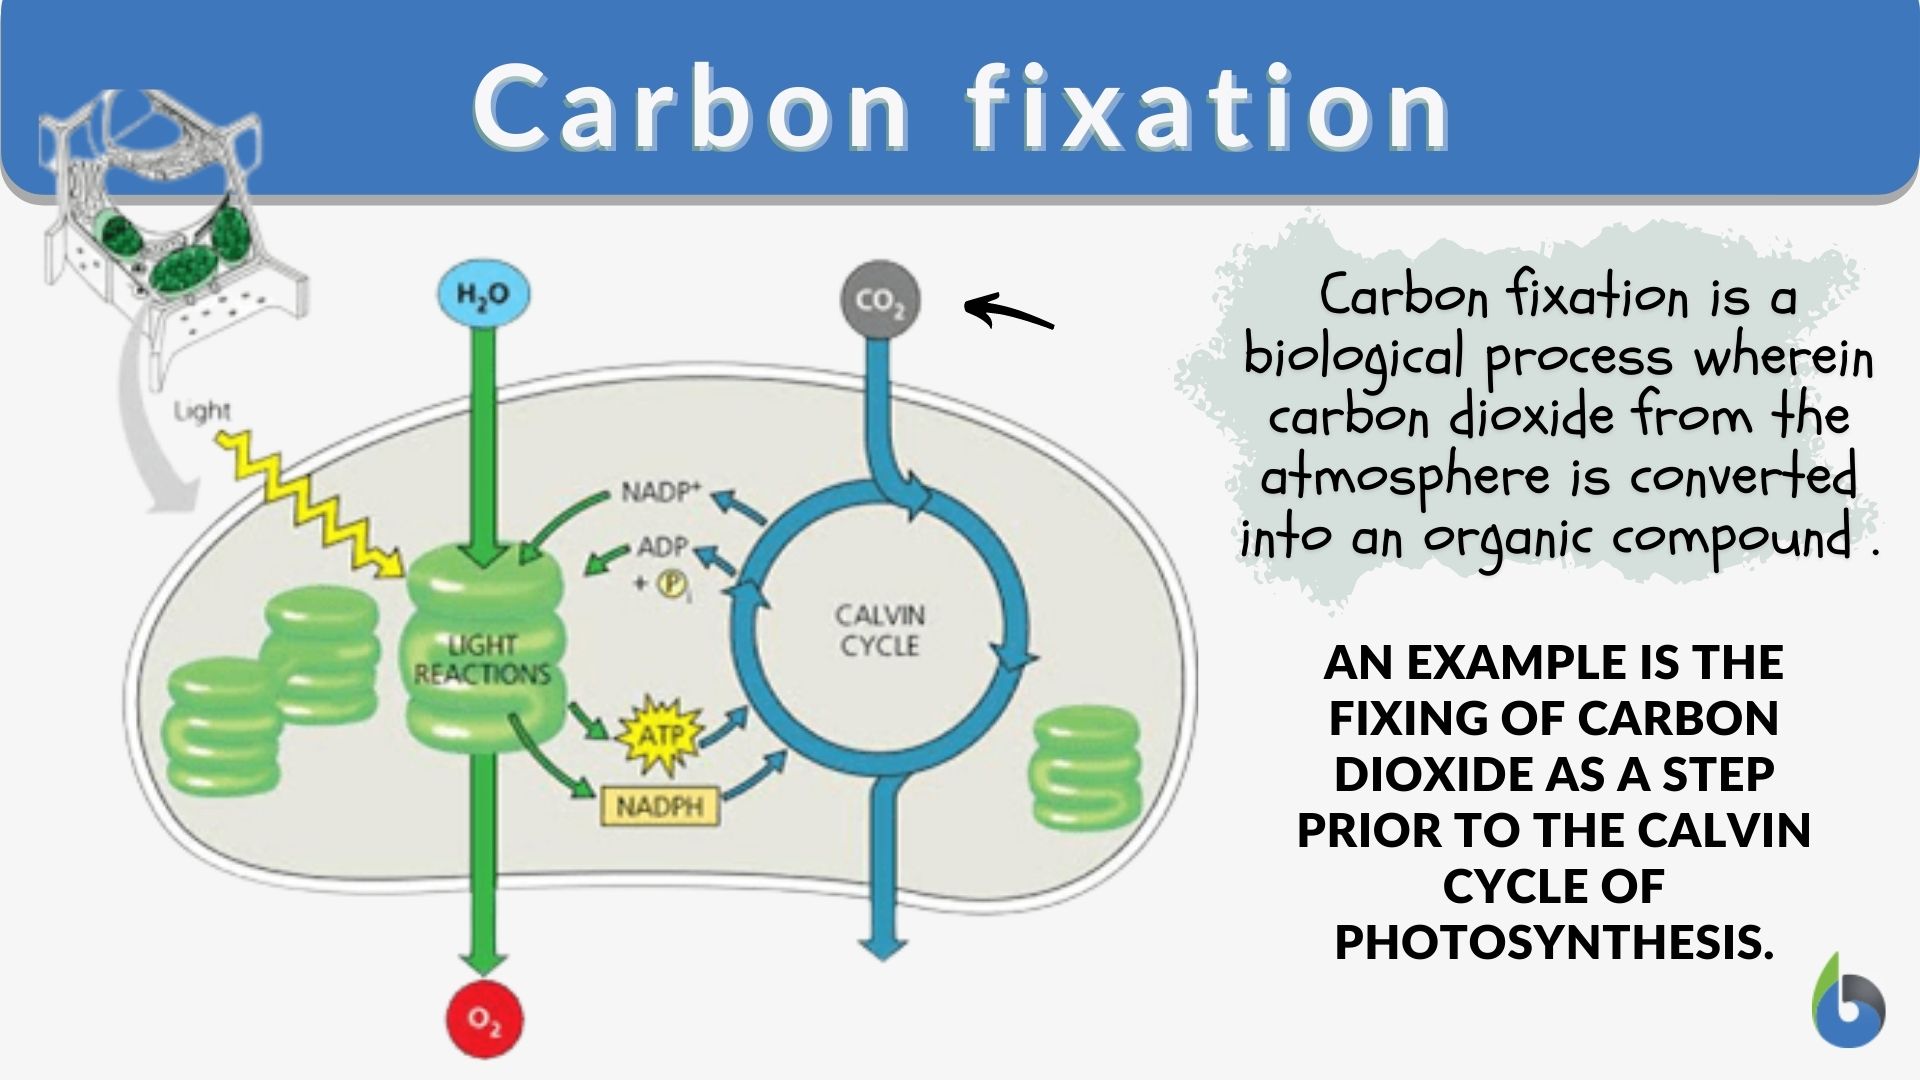 Carbon fixation - Definition and Examples - Biology Online Dictionary